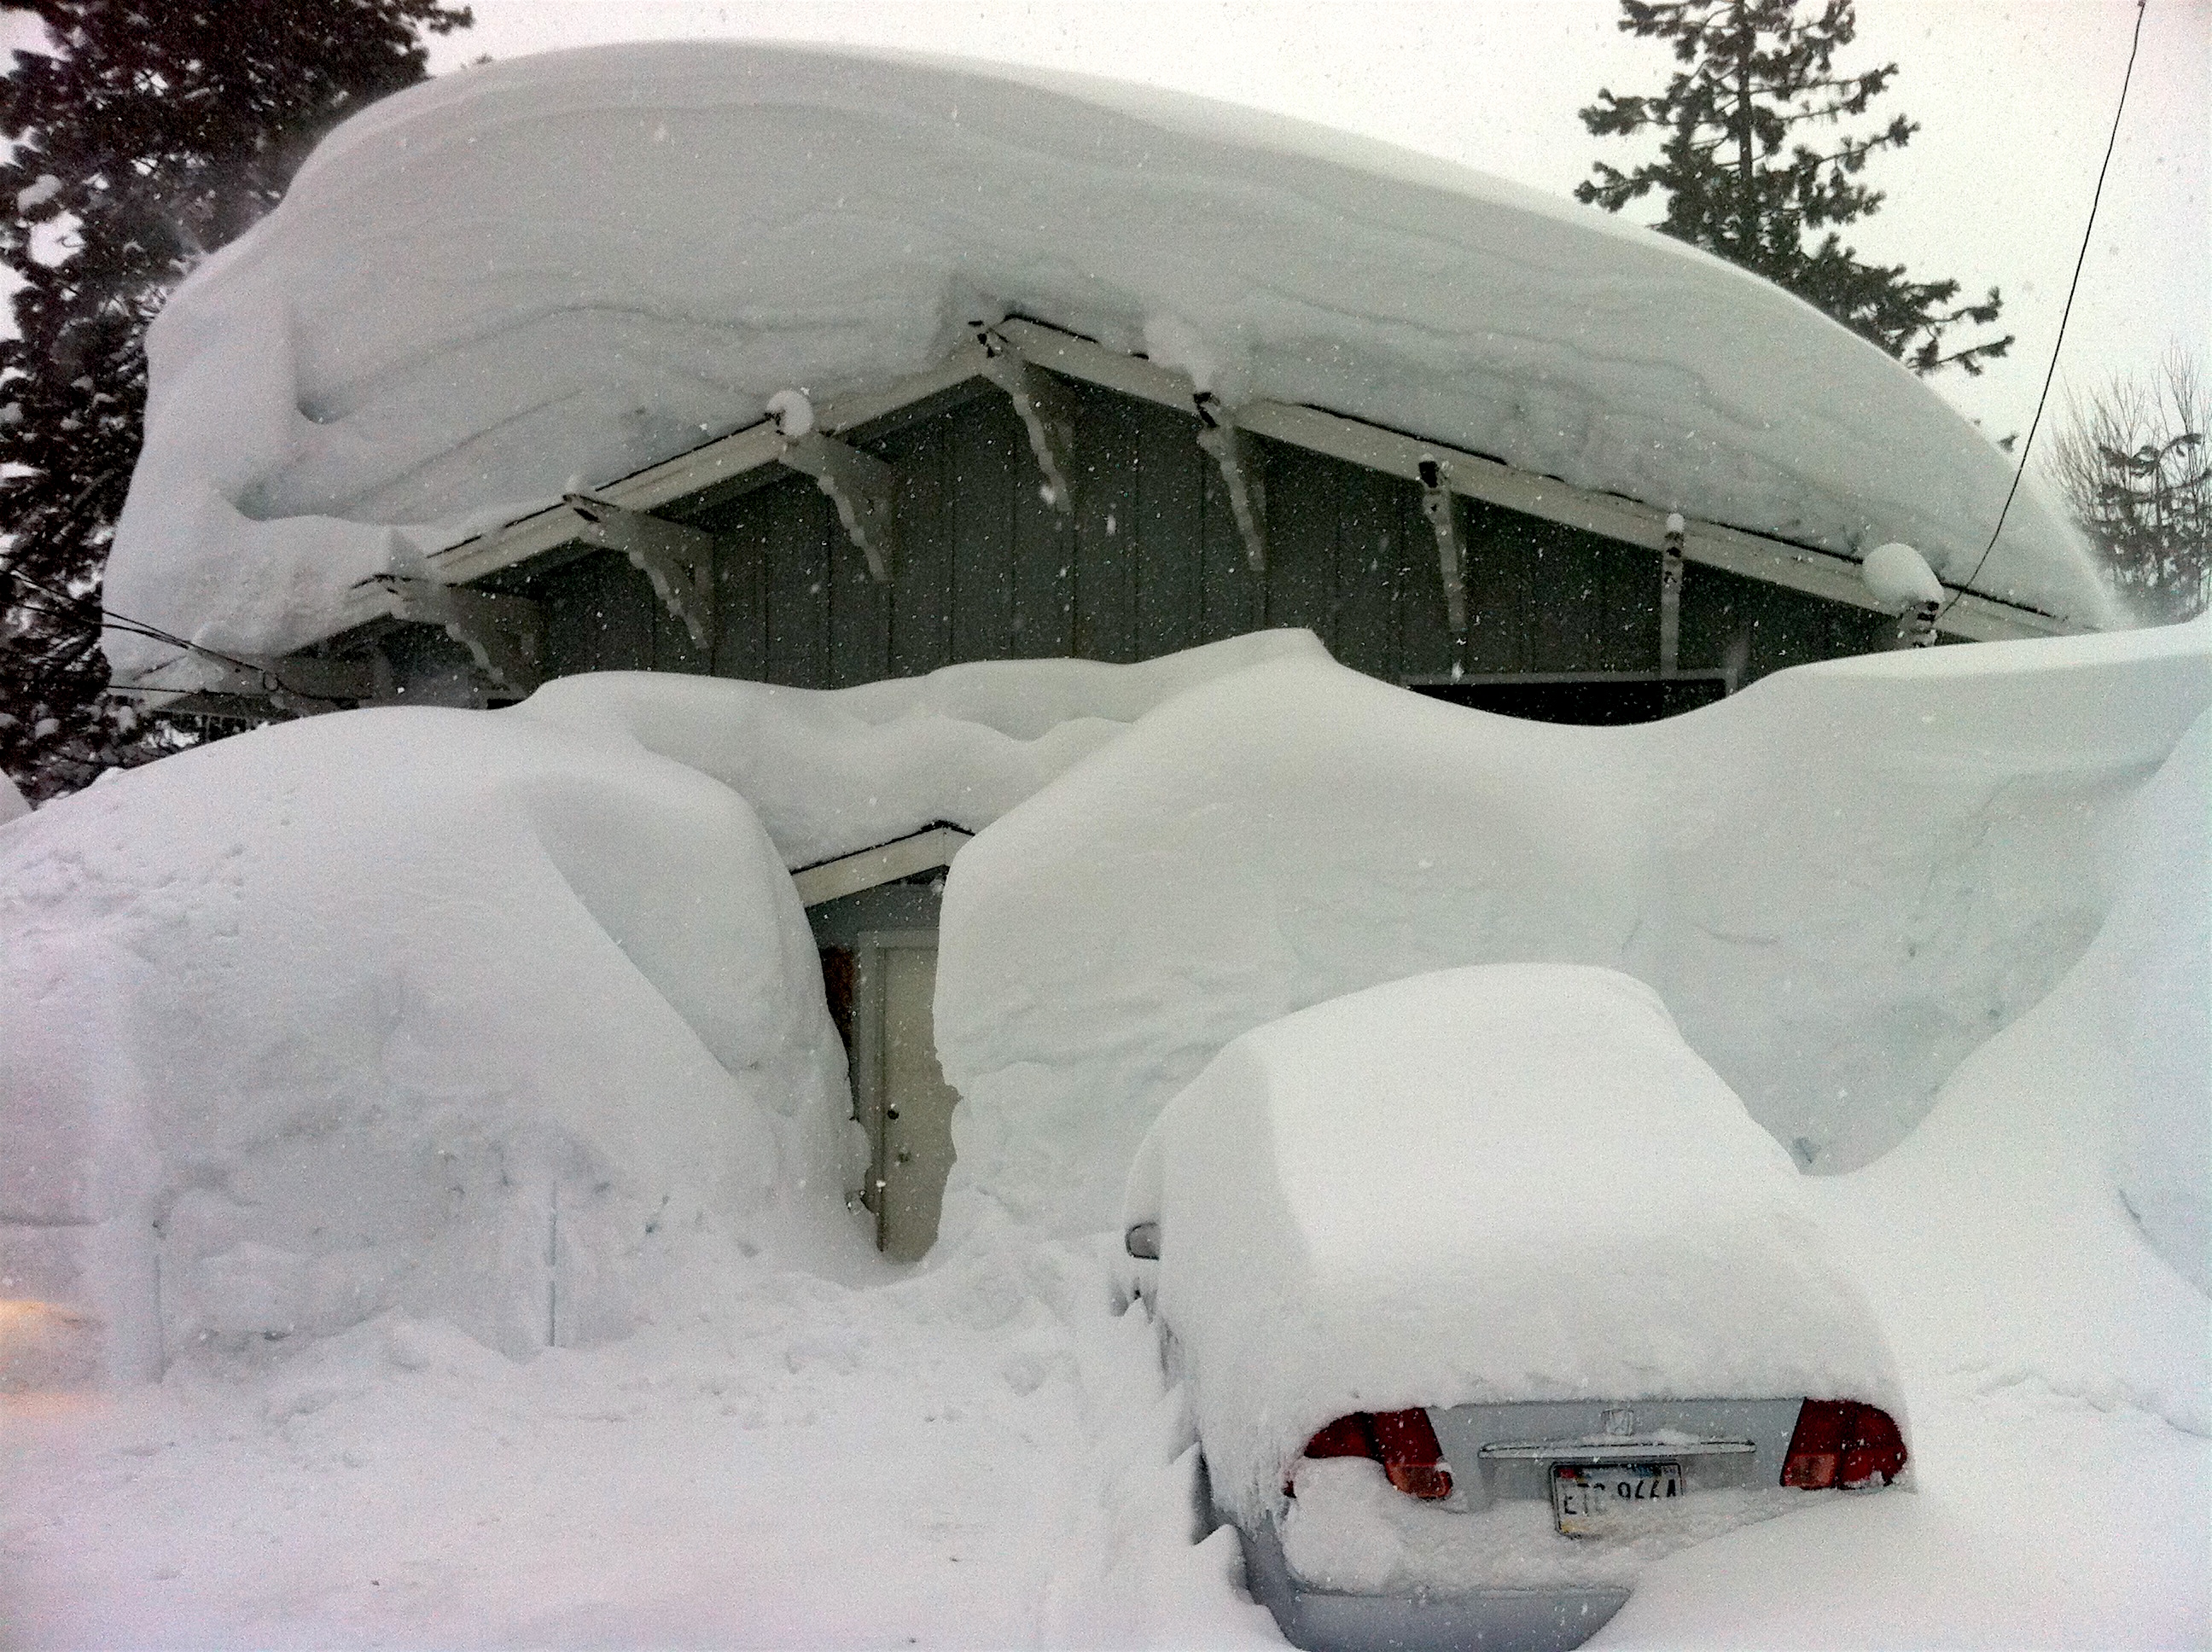 Strong La Nina in 2011 did this in Squaw Valley, CA. photo: miles clark/snowbrains.com